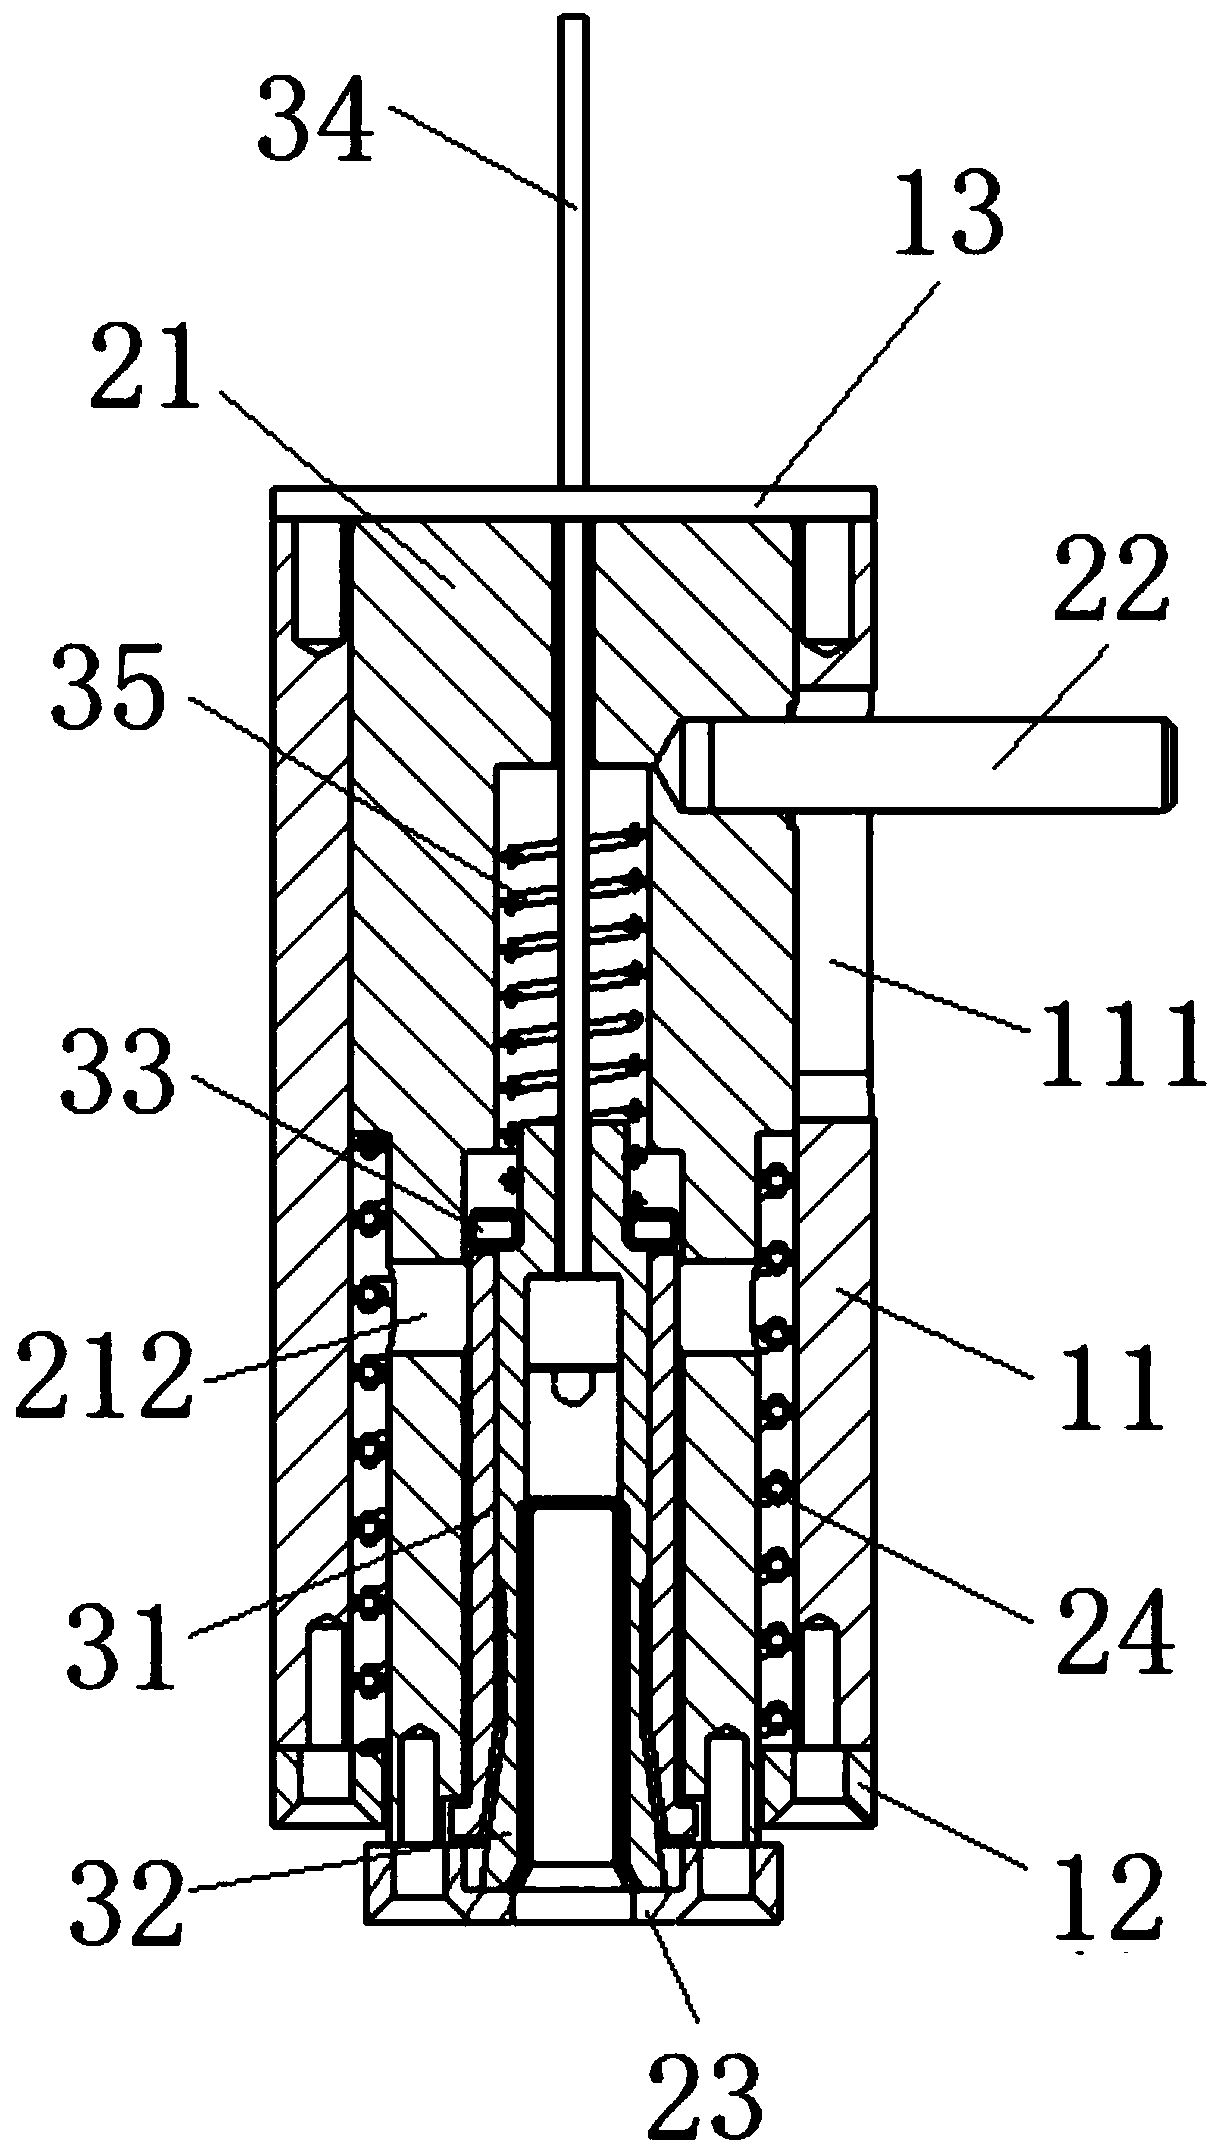 High precision self-centering external contracting type tensioning positioning mechanism